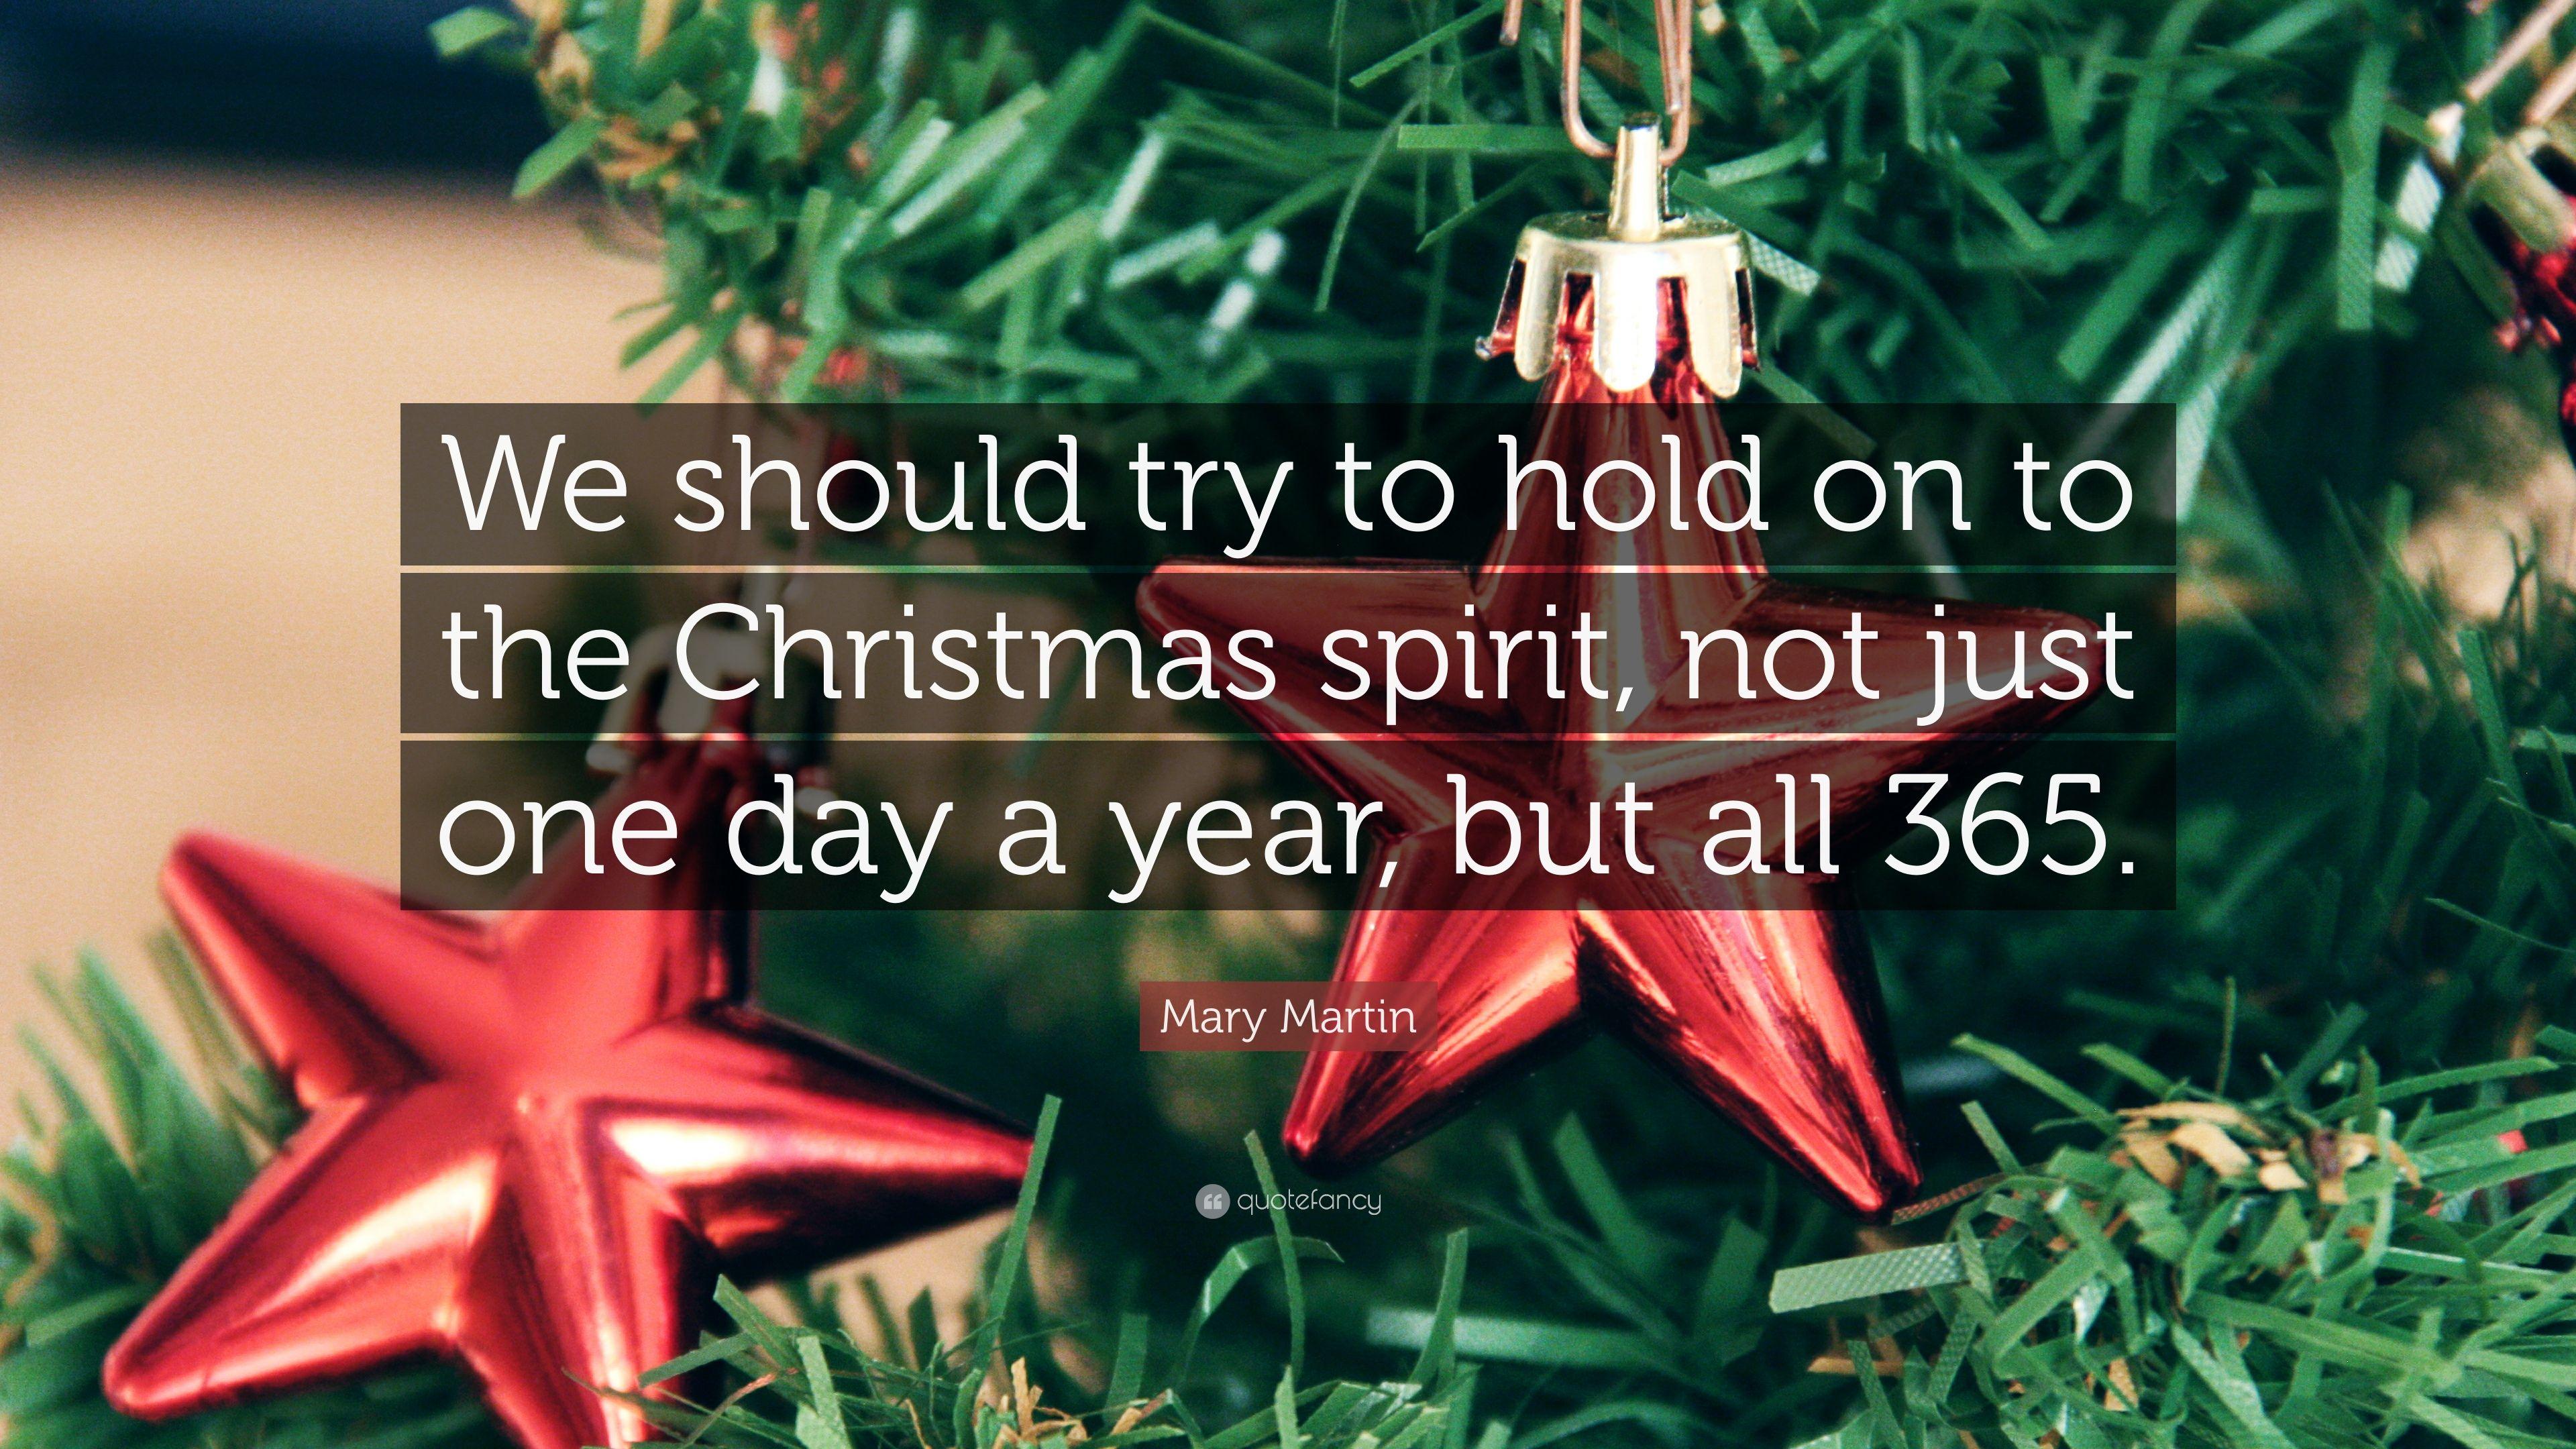 Mary Martin Quote: “We should try to hold on to the Christmas spirit